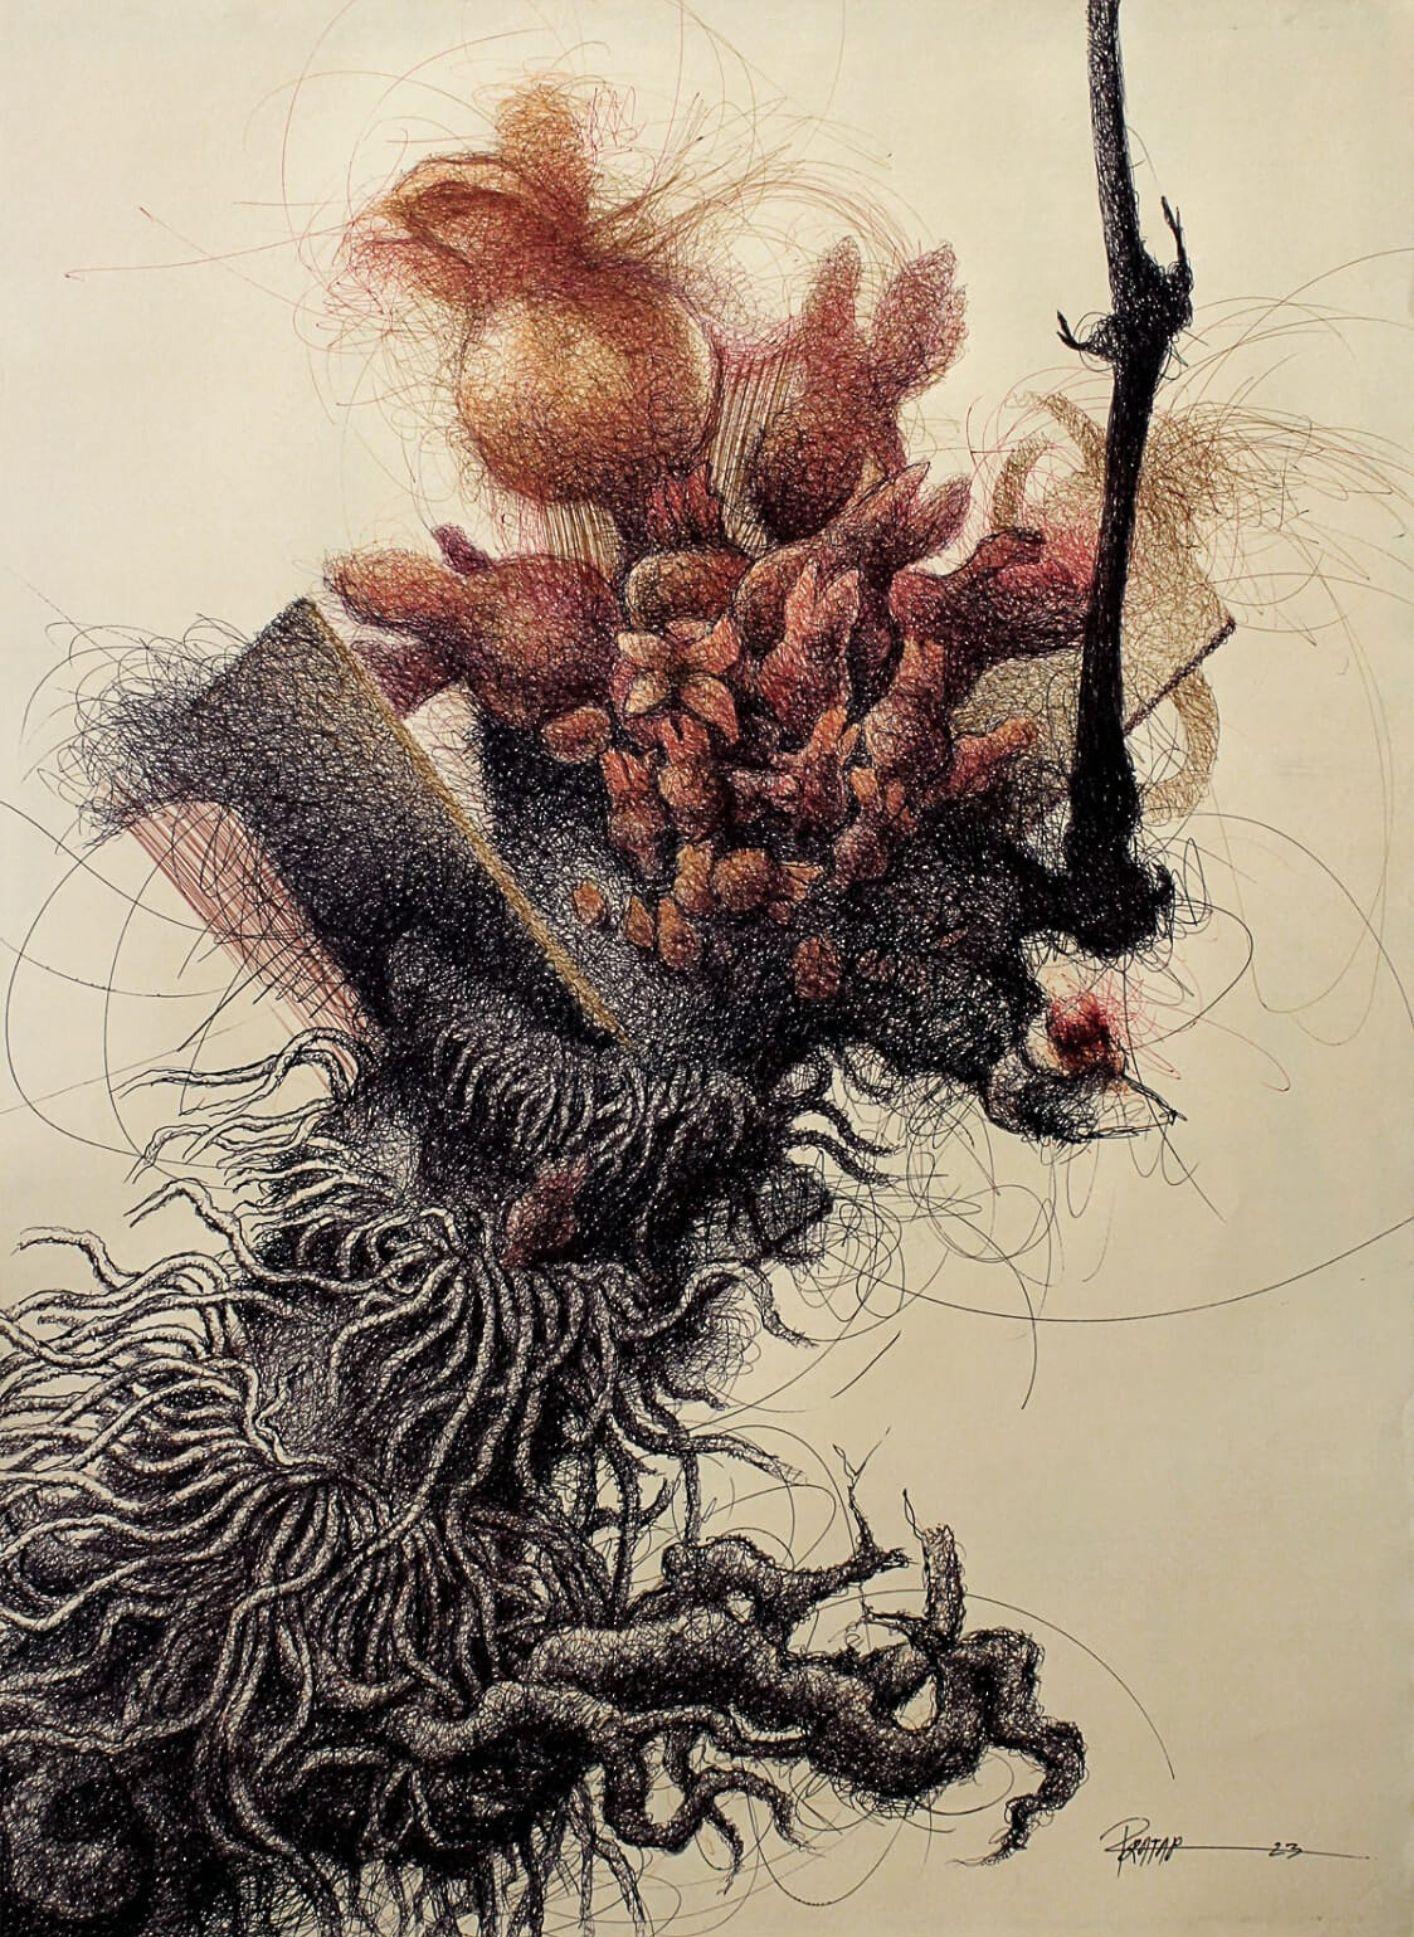 Searching Roots-6, Pen & Ink on Paper by Contemporary Indian Artist “In Stock”